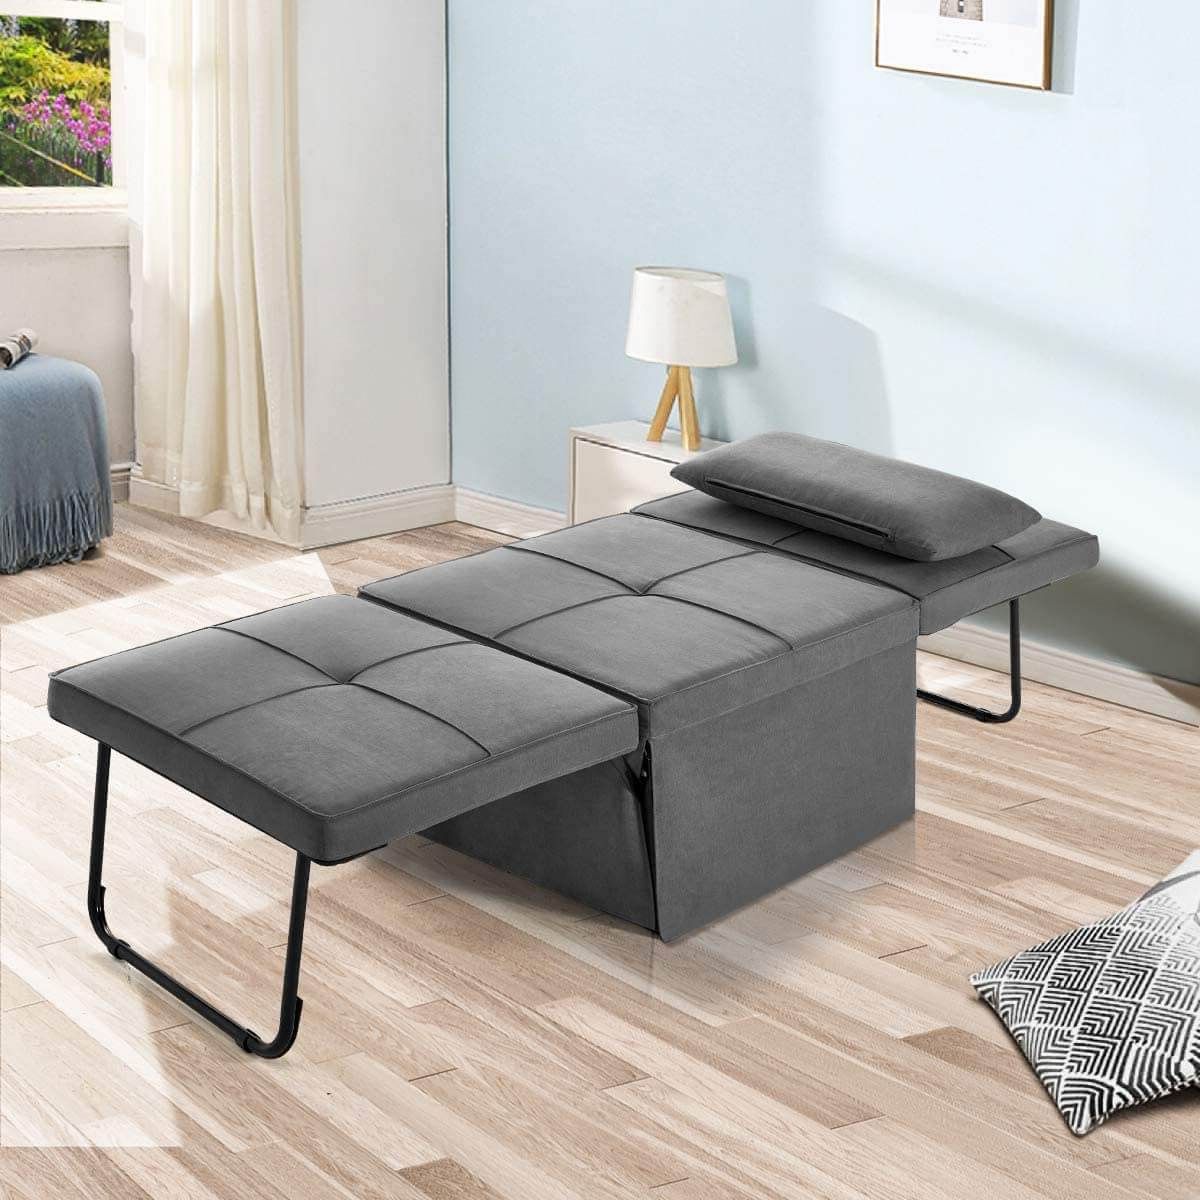 Folding Ottoman Sleeper Guest Bed, 4 In 1 Multi Function Adjustable Gu Throughout 4 In 1 Convertible Sleeper Chair Beds (View 5 of 20)